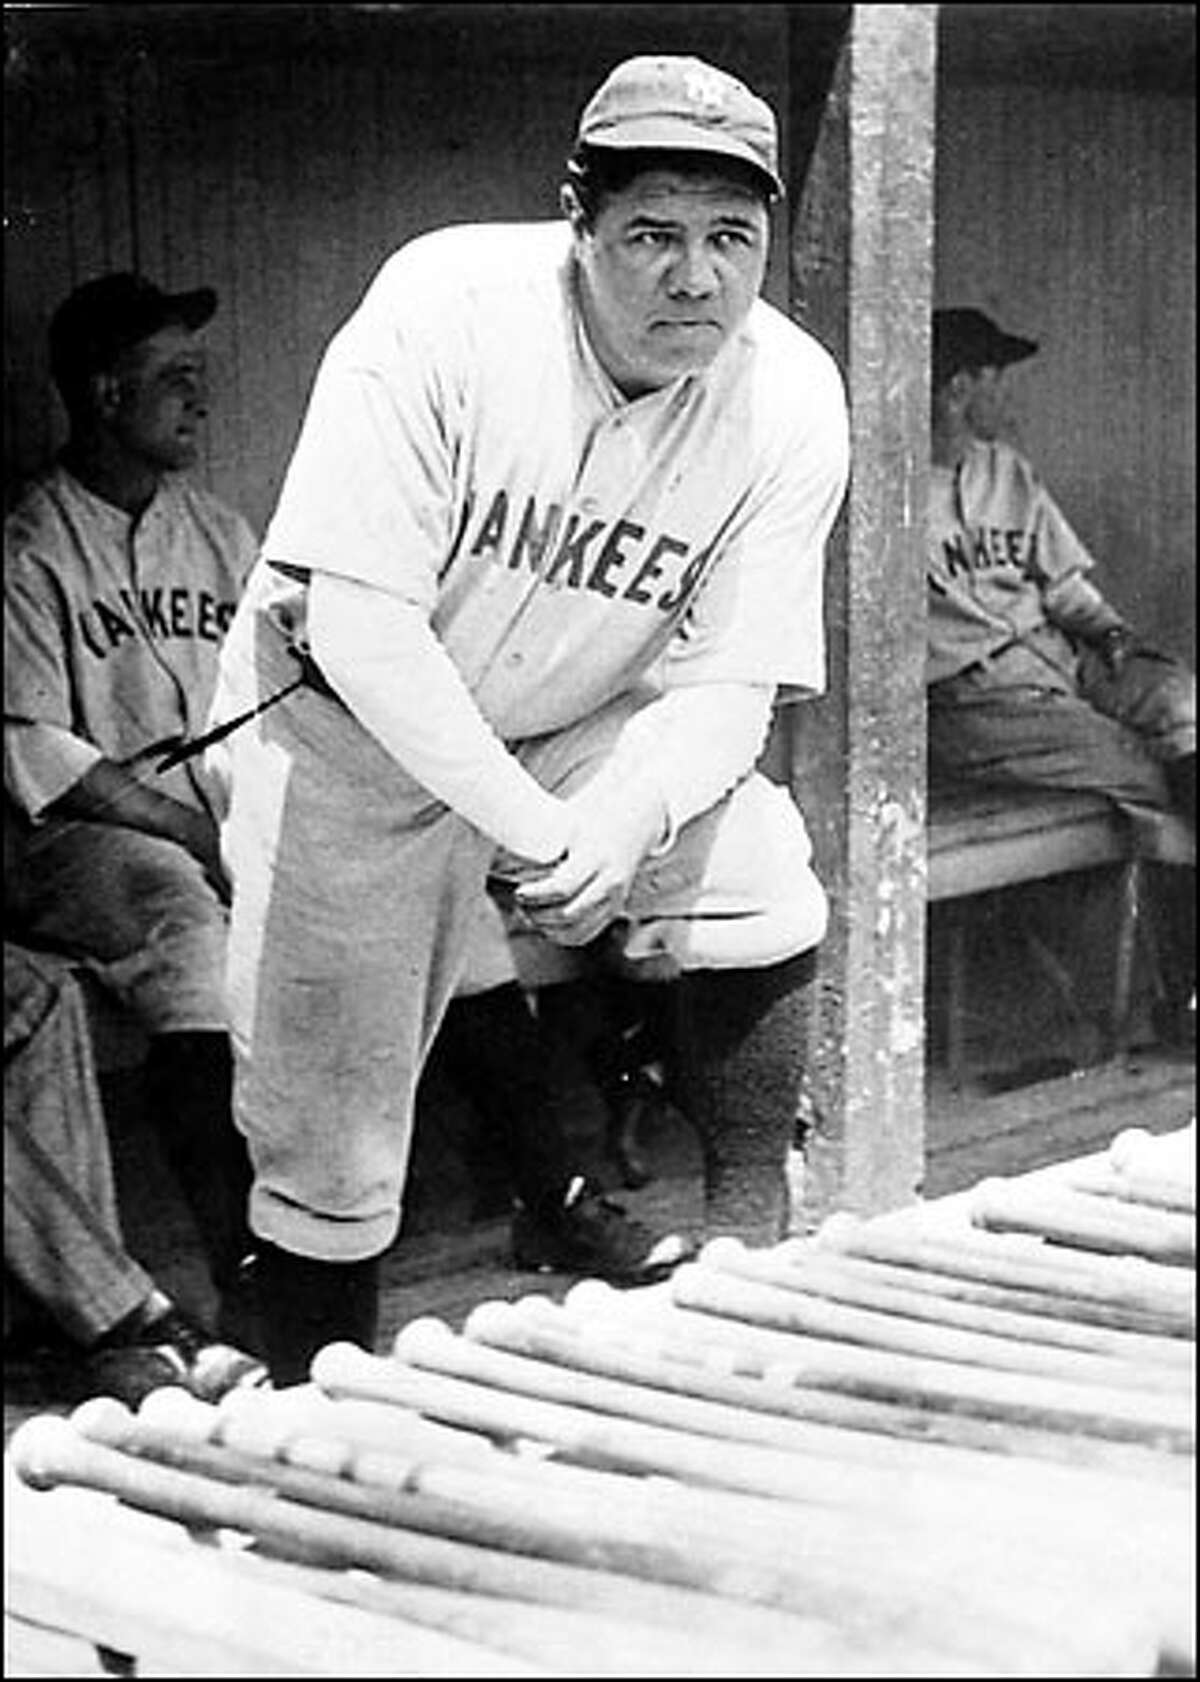 A fading Babe Ruth upstaged baseball's finest at the inaugural All-Star Game. His two-run home run gave the American League a 3-0 lead in the third inning, and his running catch in deep right-center snuffed a National League rally in the eigth.